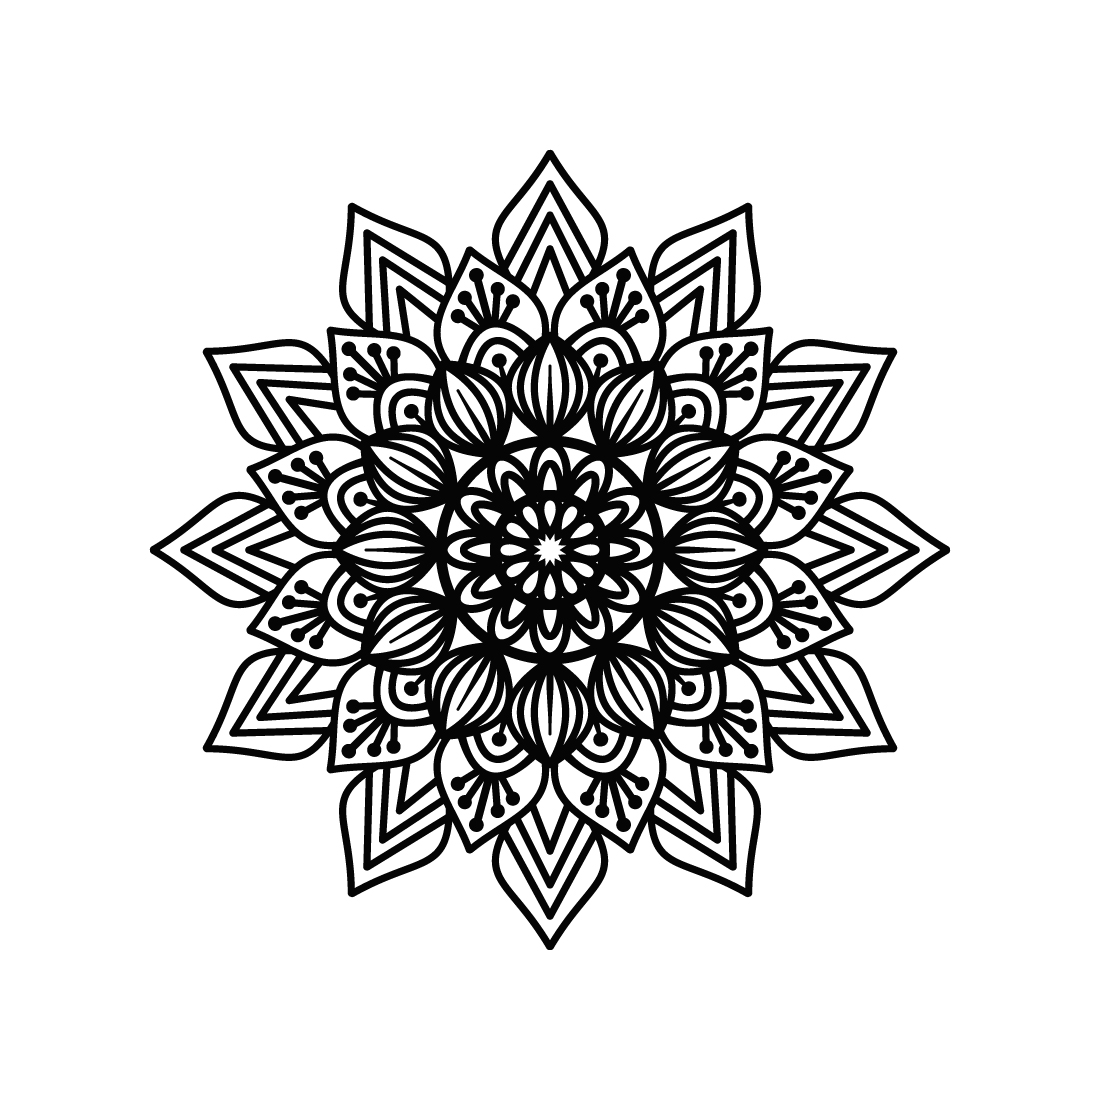 Bundle of 10 Ethnic Style Mandalas for Paper Cutting or Coloring Book Pages preview image.